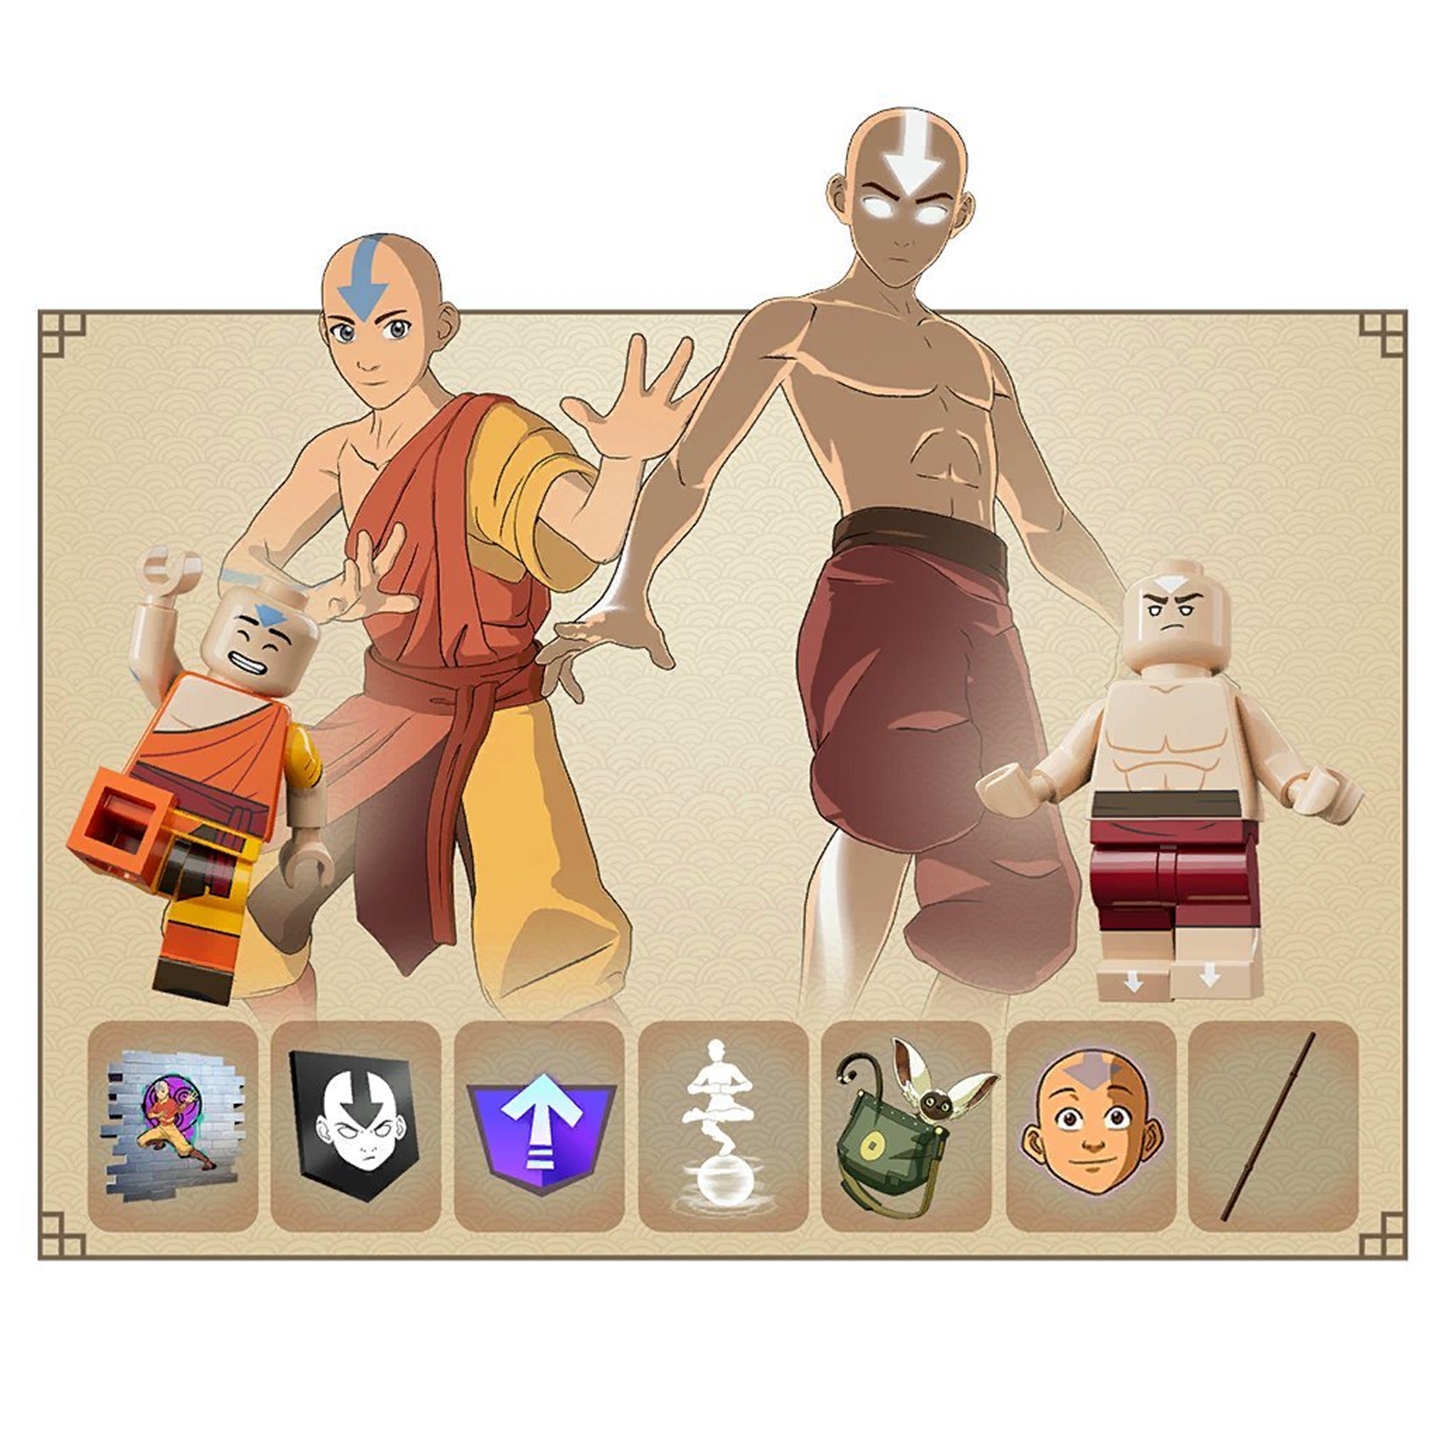 Aang's skin will be available through a Mini Battle Pass that arrives at Fortnite next Friday (12).